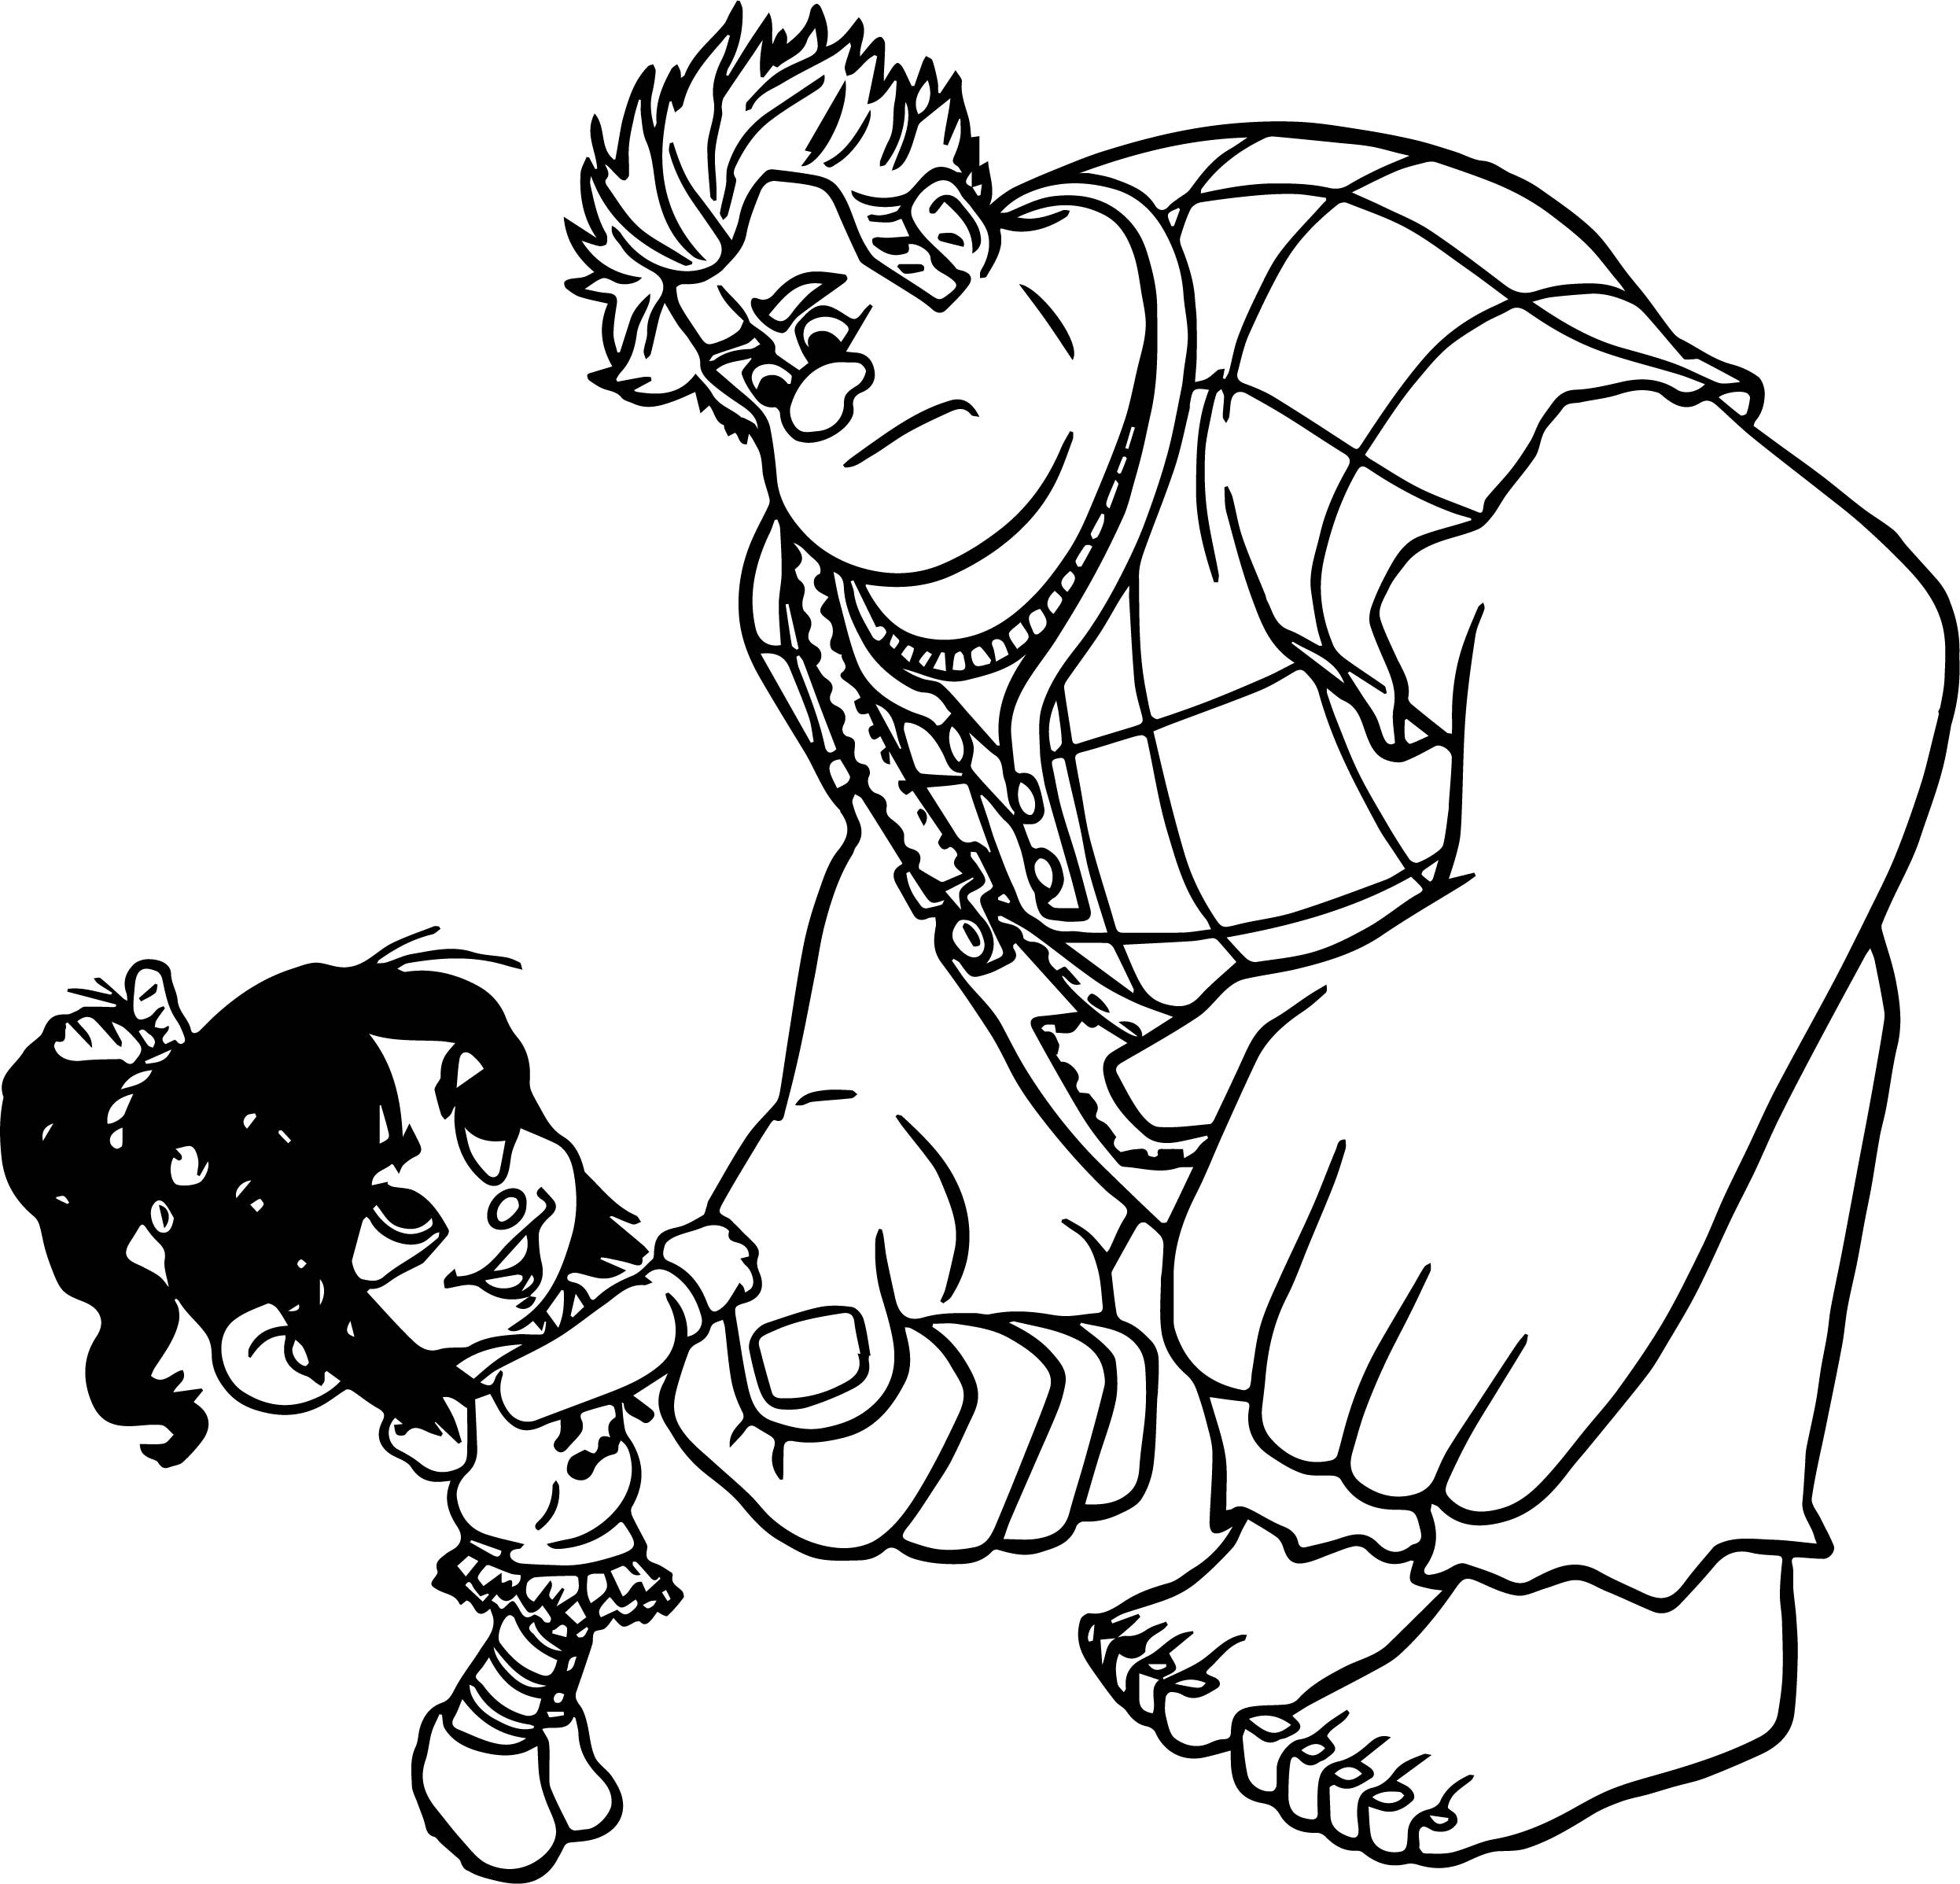 Free Coloring Pages Wreck It Ralph - boringpop.com